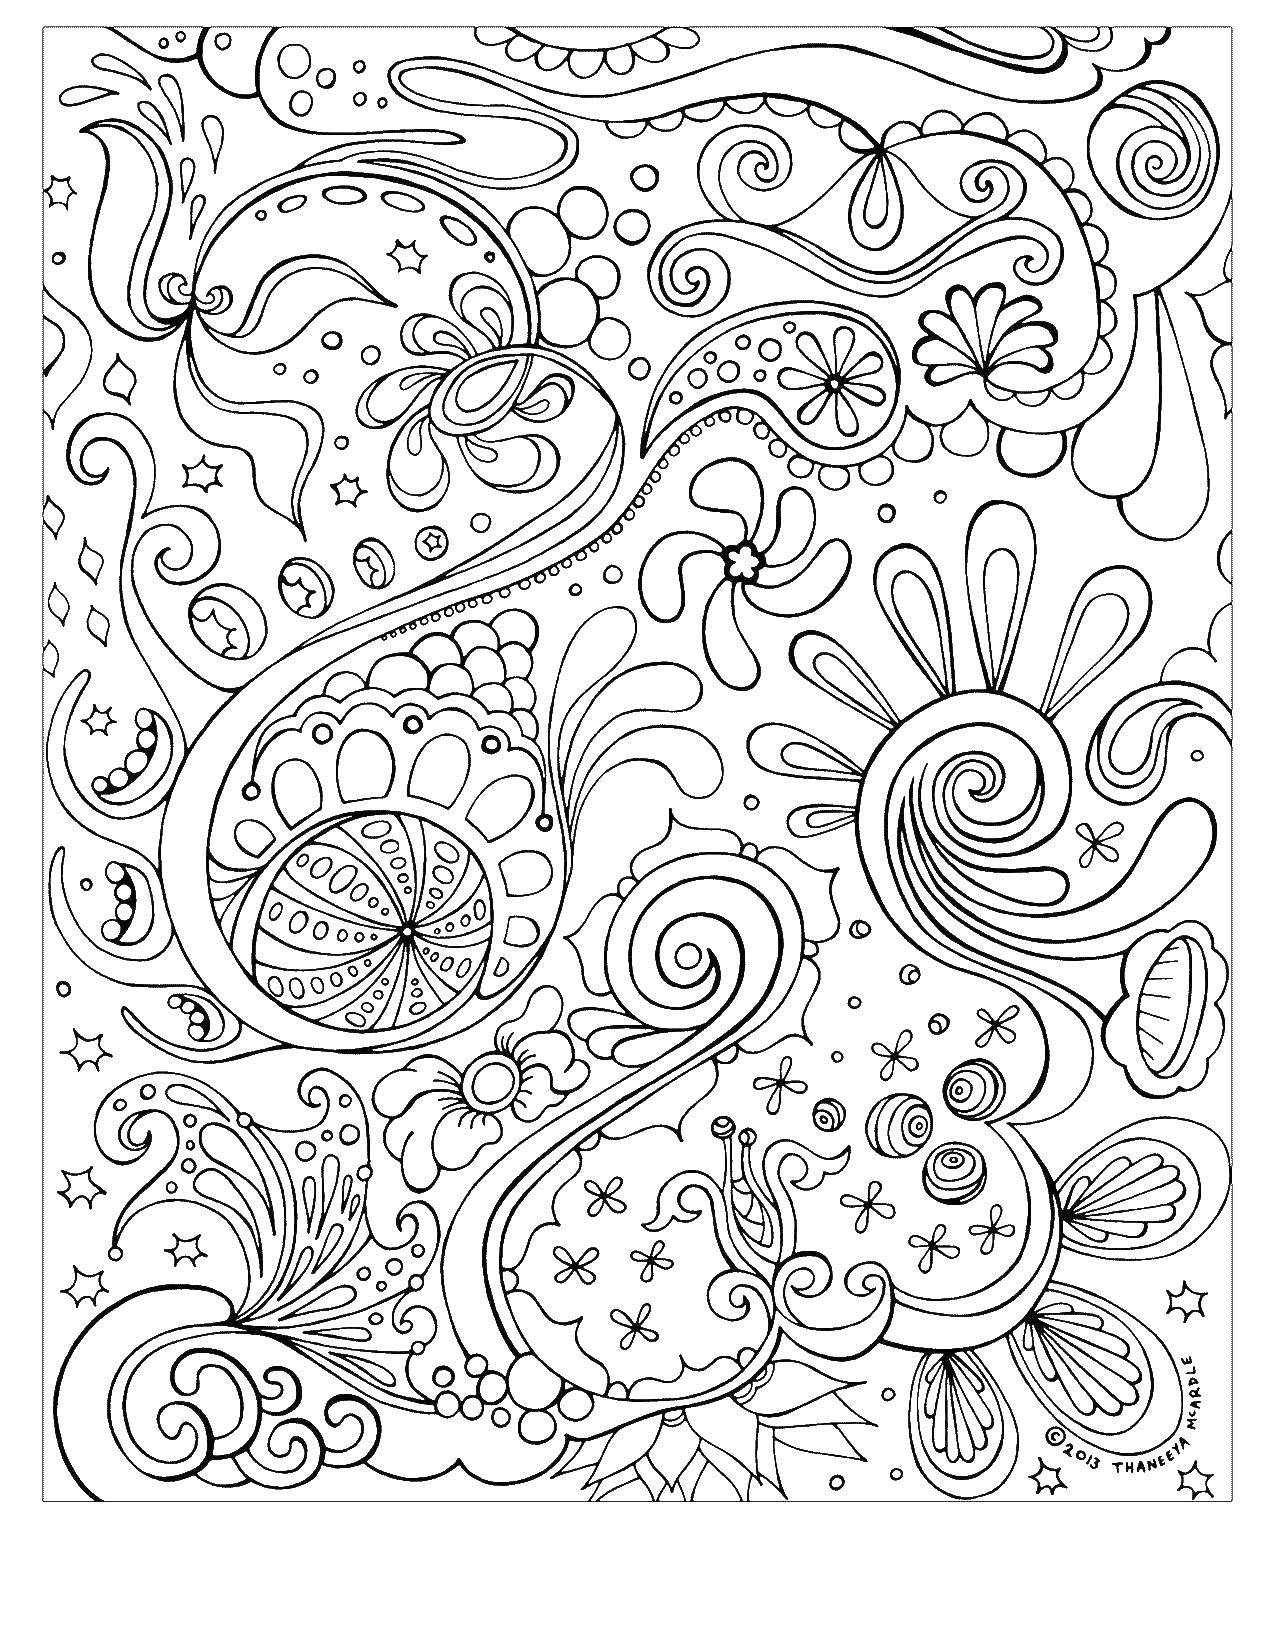 Coloring An interesting pattern. Category Patterns. Tags:  Patterns, people.